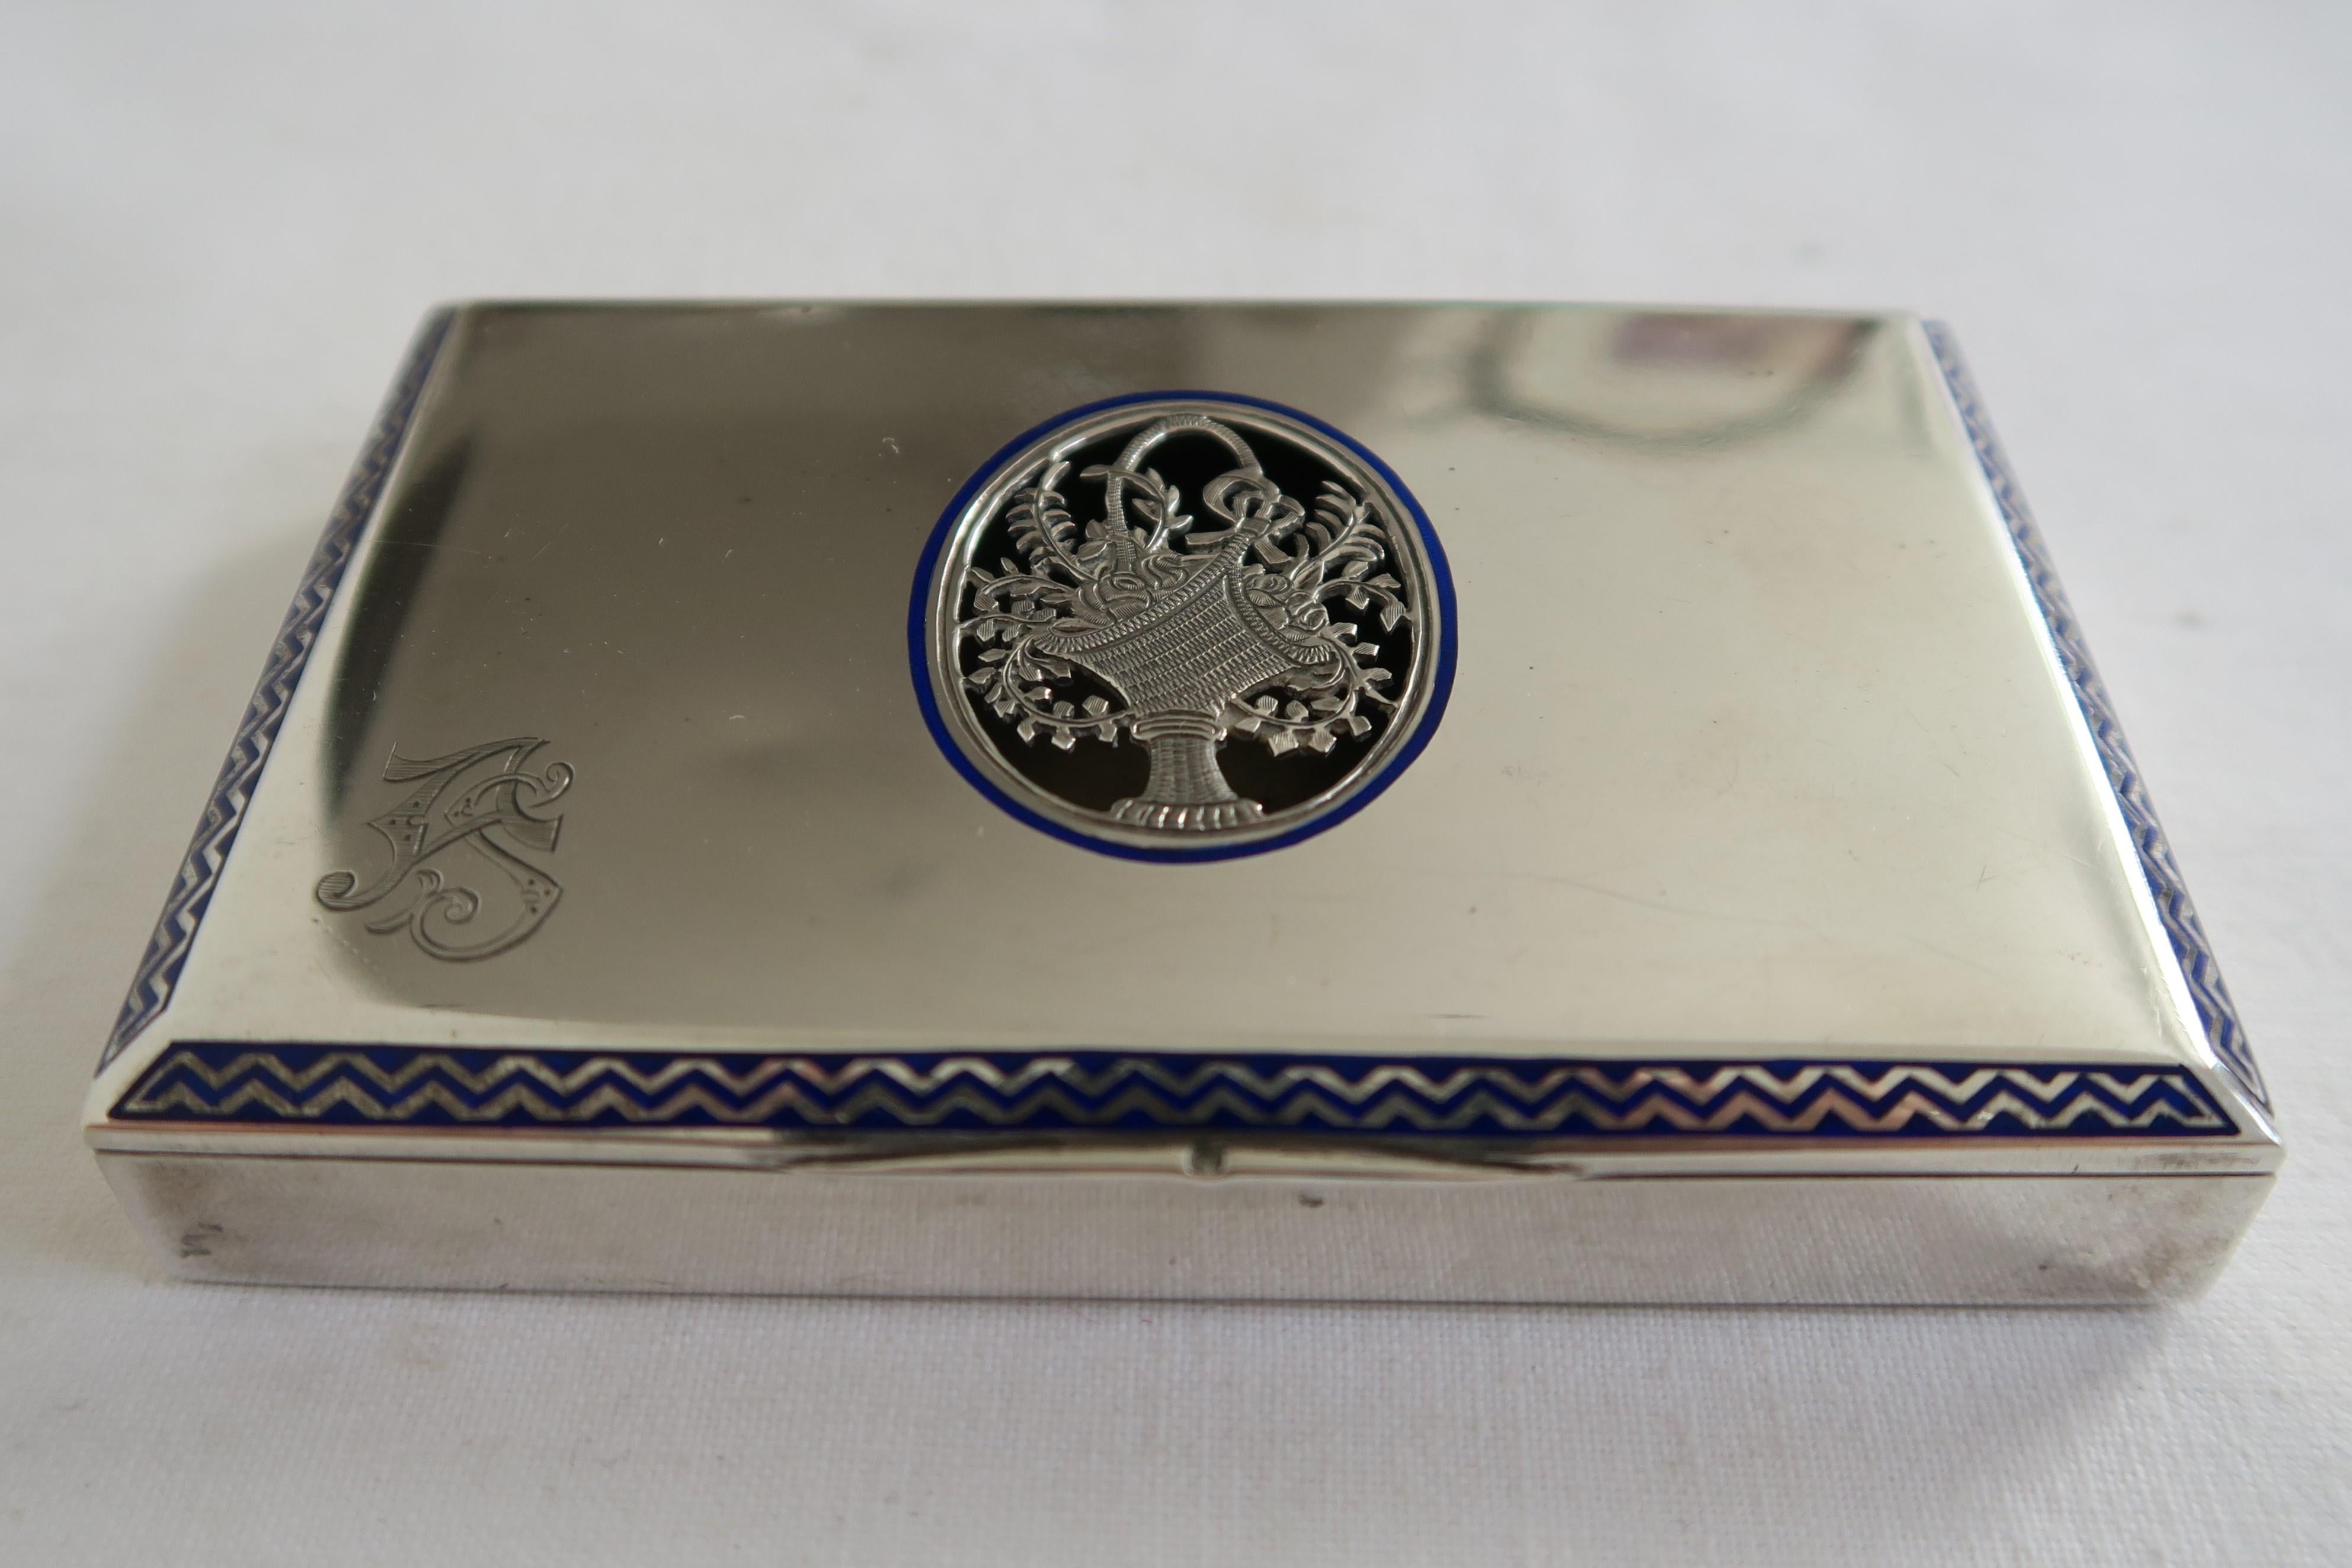 For sale is an elegant cigarette box. It is made from solid silver and is stamped with the Diana Head which was the official hallmark of the Austrian-Hungarian Empire and exclusively in use between 1872 and 1922. The lid and the backside of the box